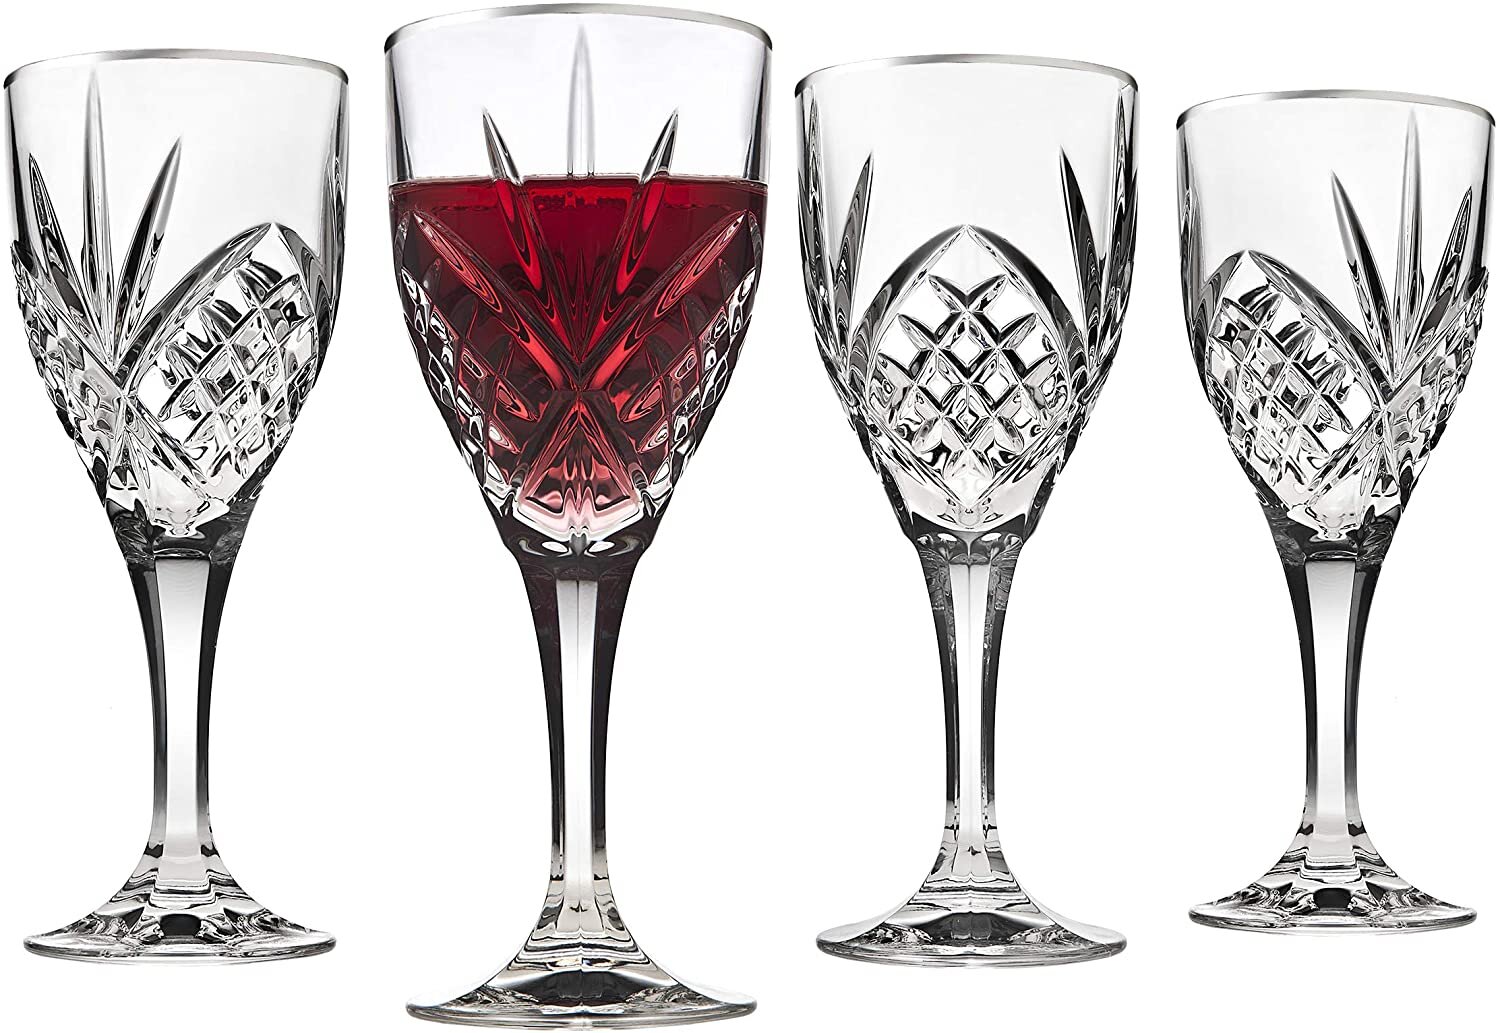 Buy the Crystal Wine Glasses Assorted 5pc Lot